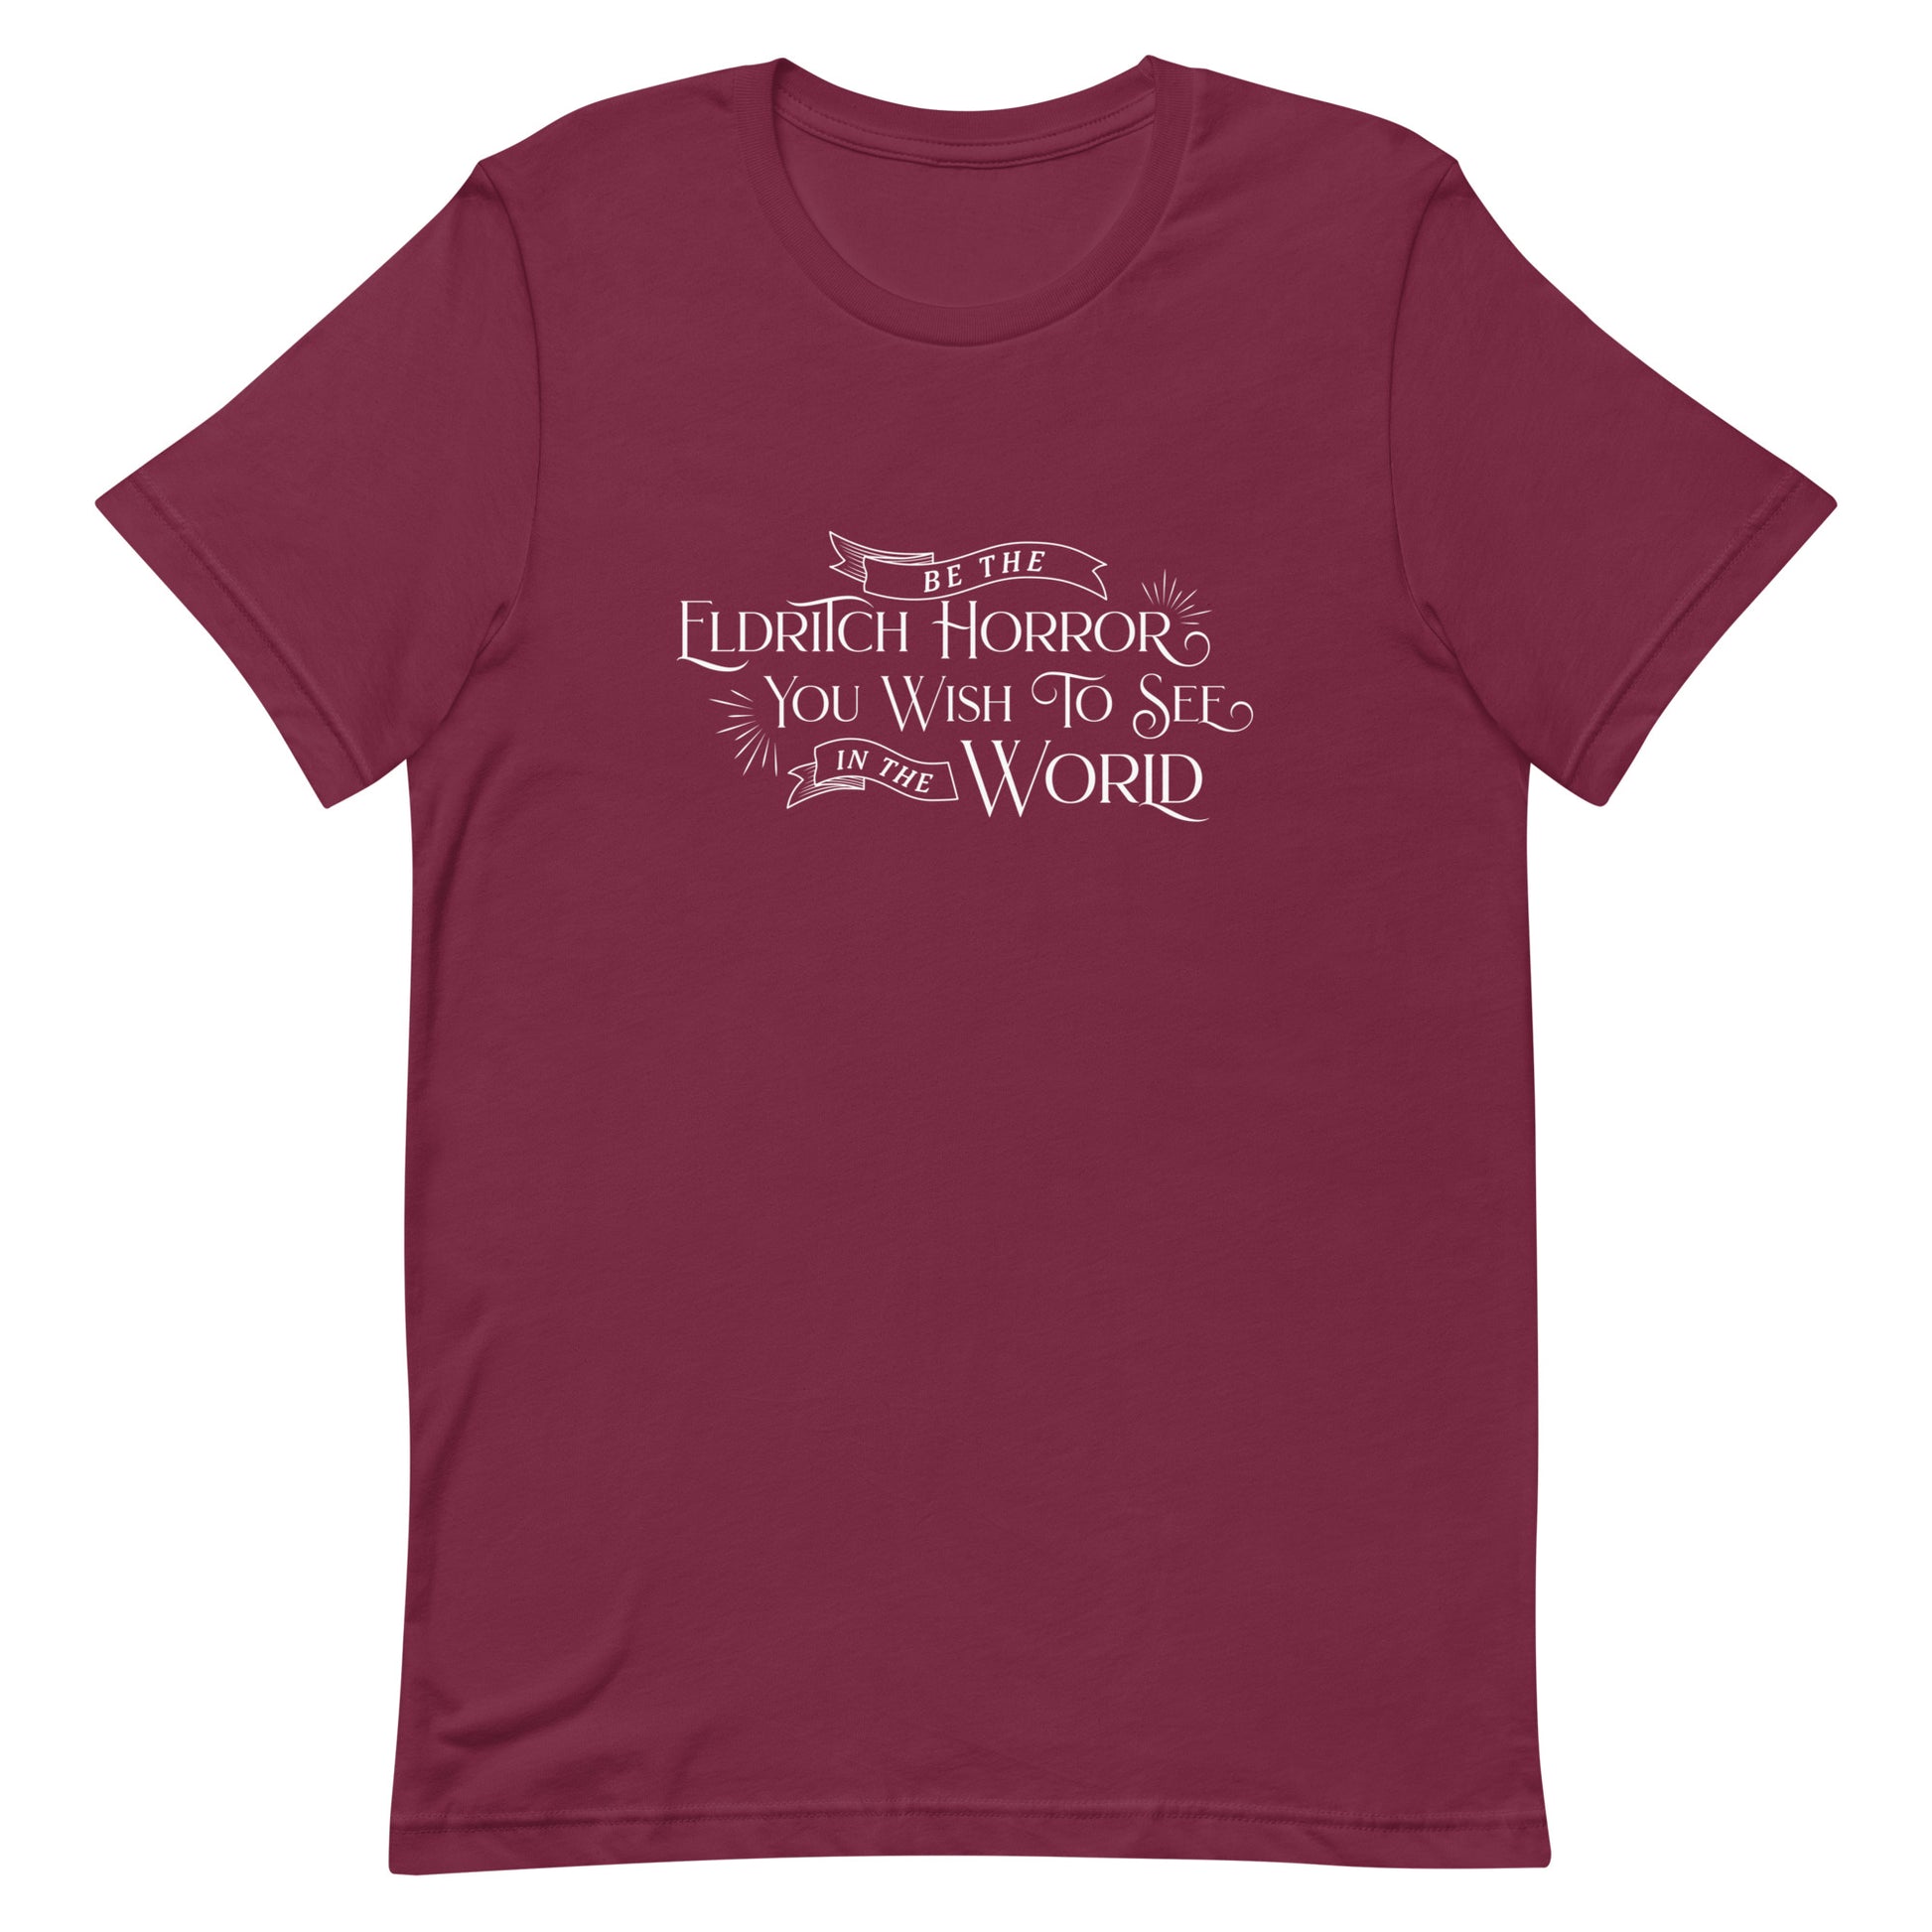 A maroon crewneck t-shirt with white text in an old-fashioned style that reads "Be The Eldritch Horror You Wish To See In The World"